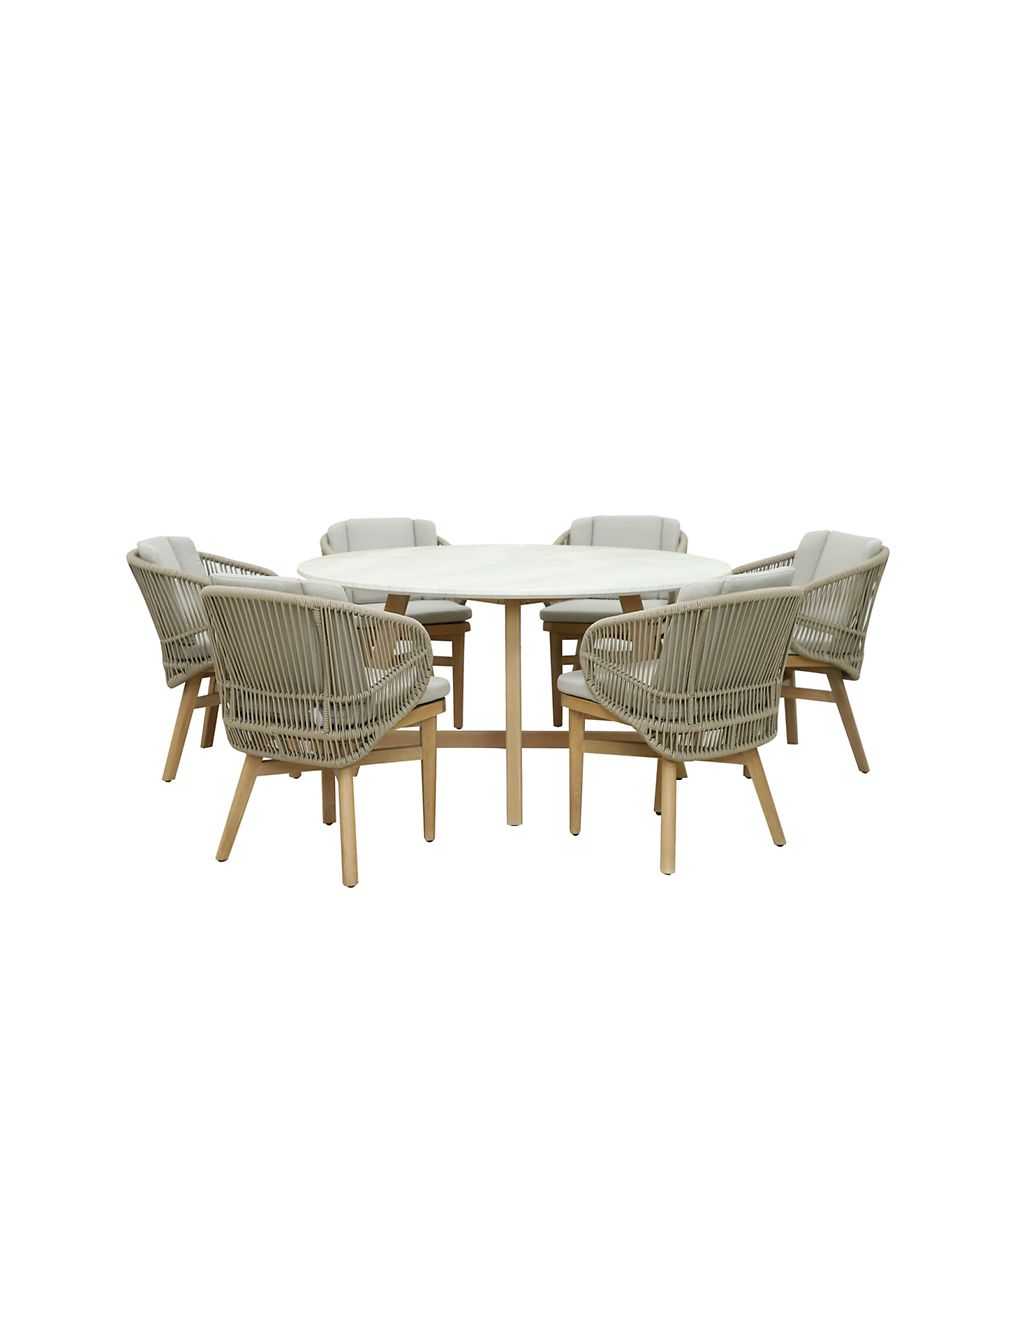 Bali Garden Dining Table & Chairs 1 of 4